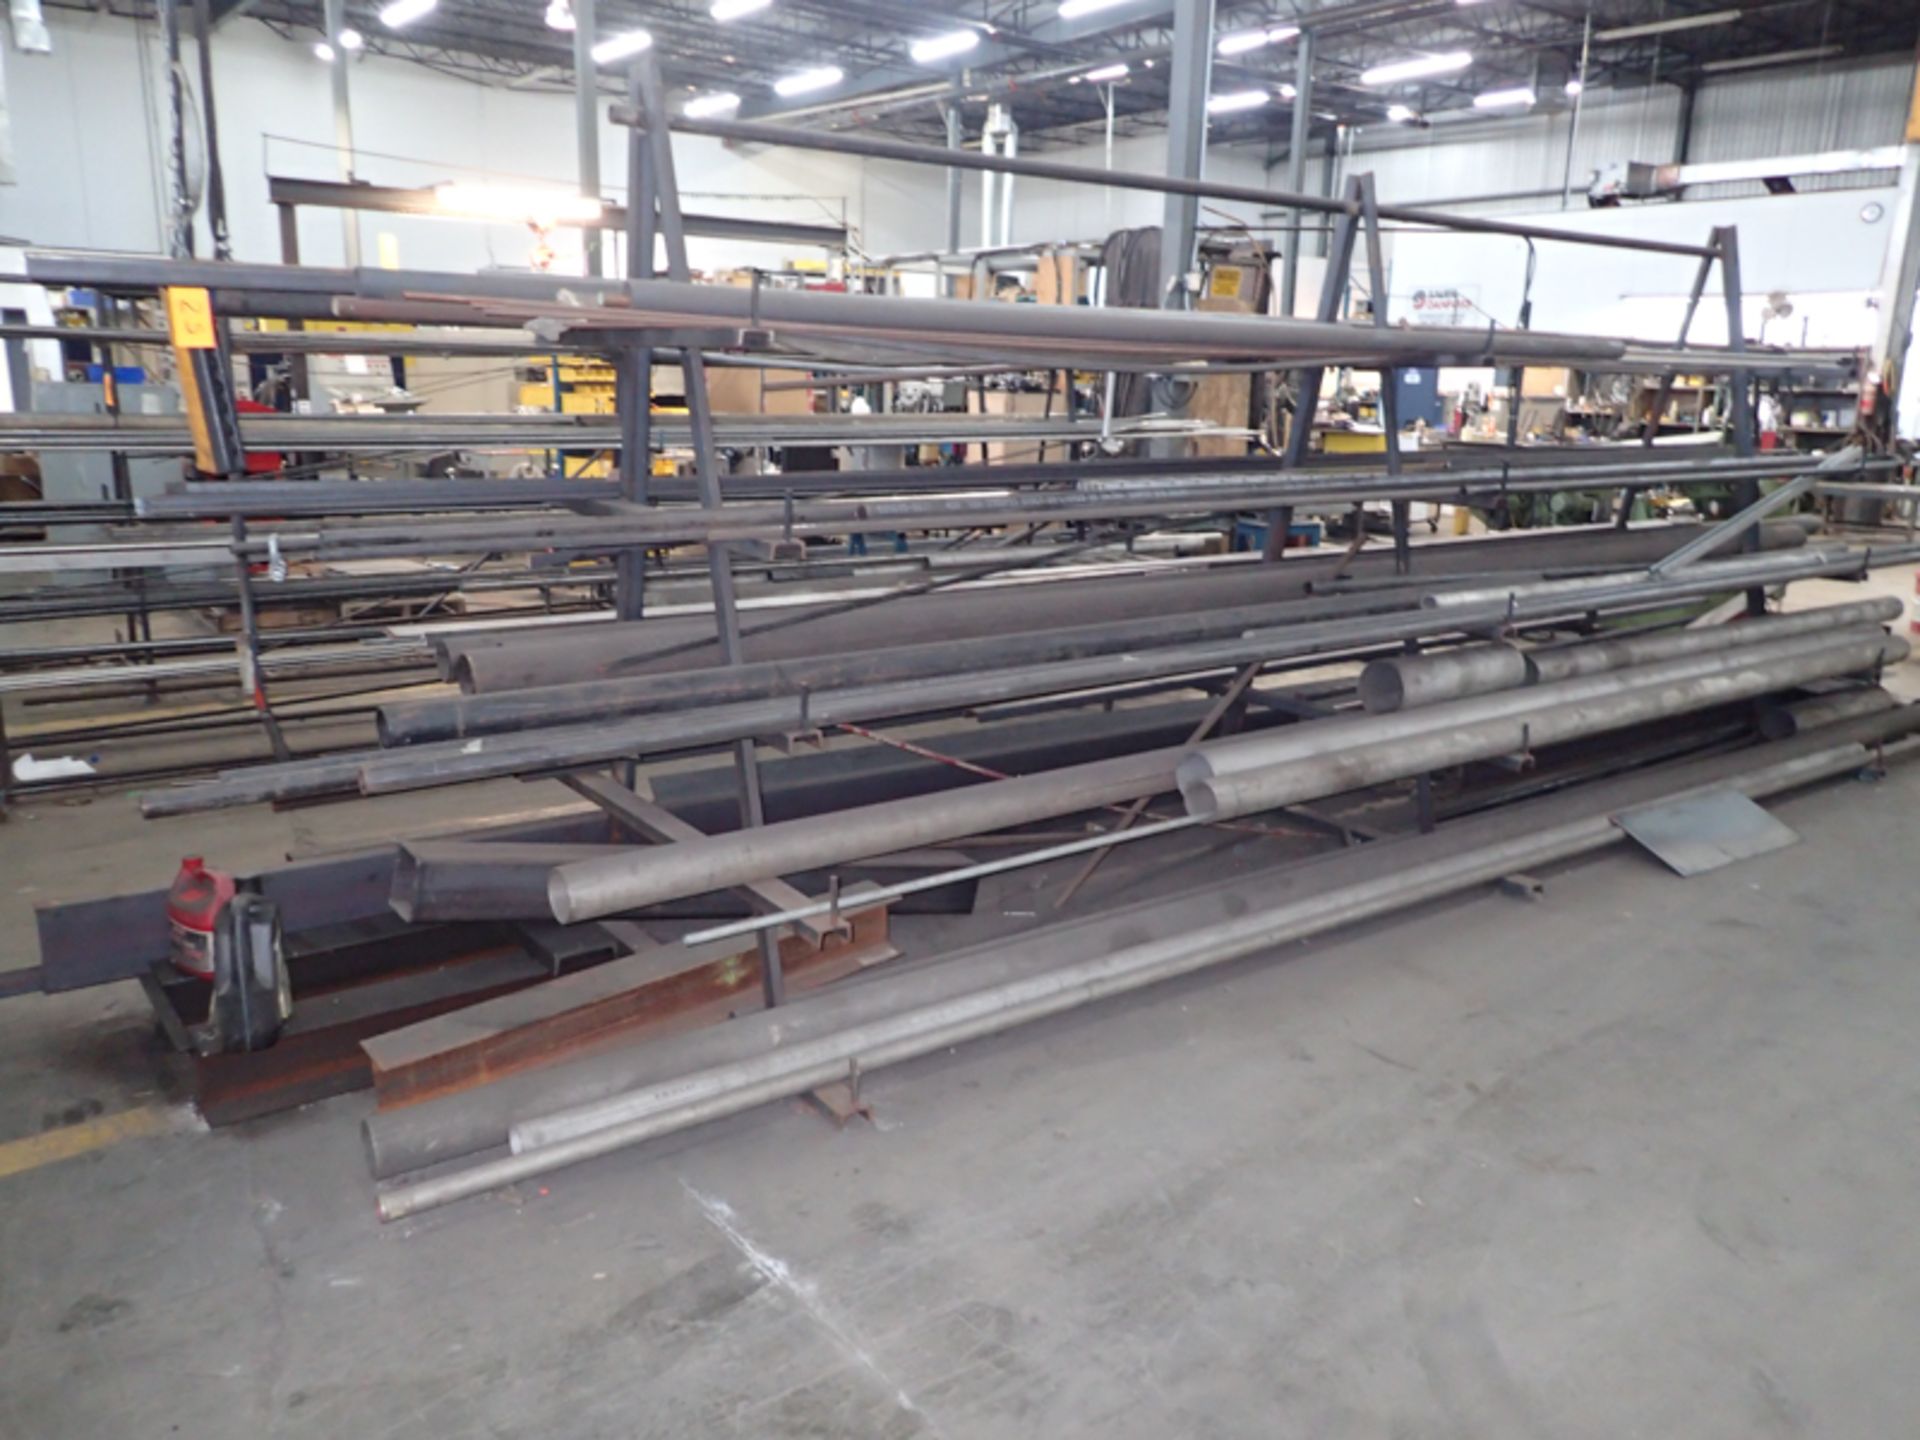 5 RACK OF ASSORTED RODS, BARS, PLATES, ANGLES, PIPES (STEEL, STAINLESS STEEL & ALUMINUM) - Image 7 of 7